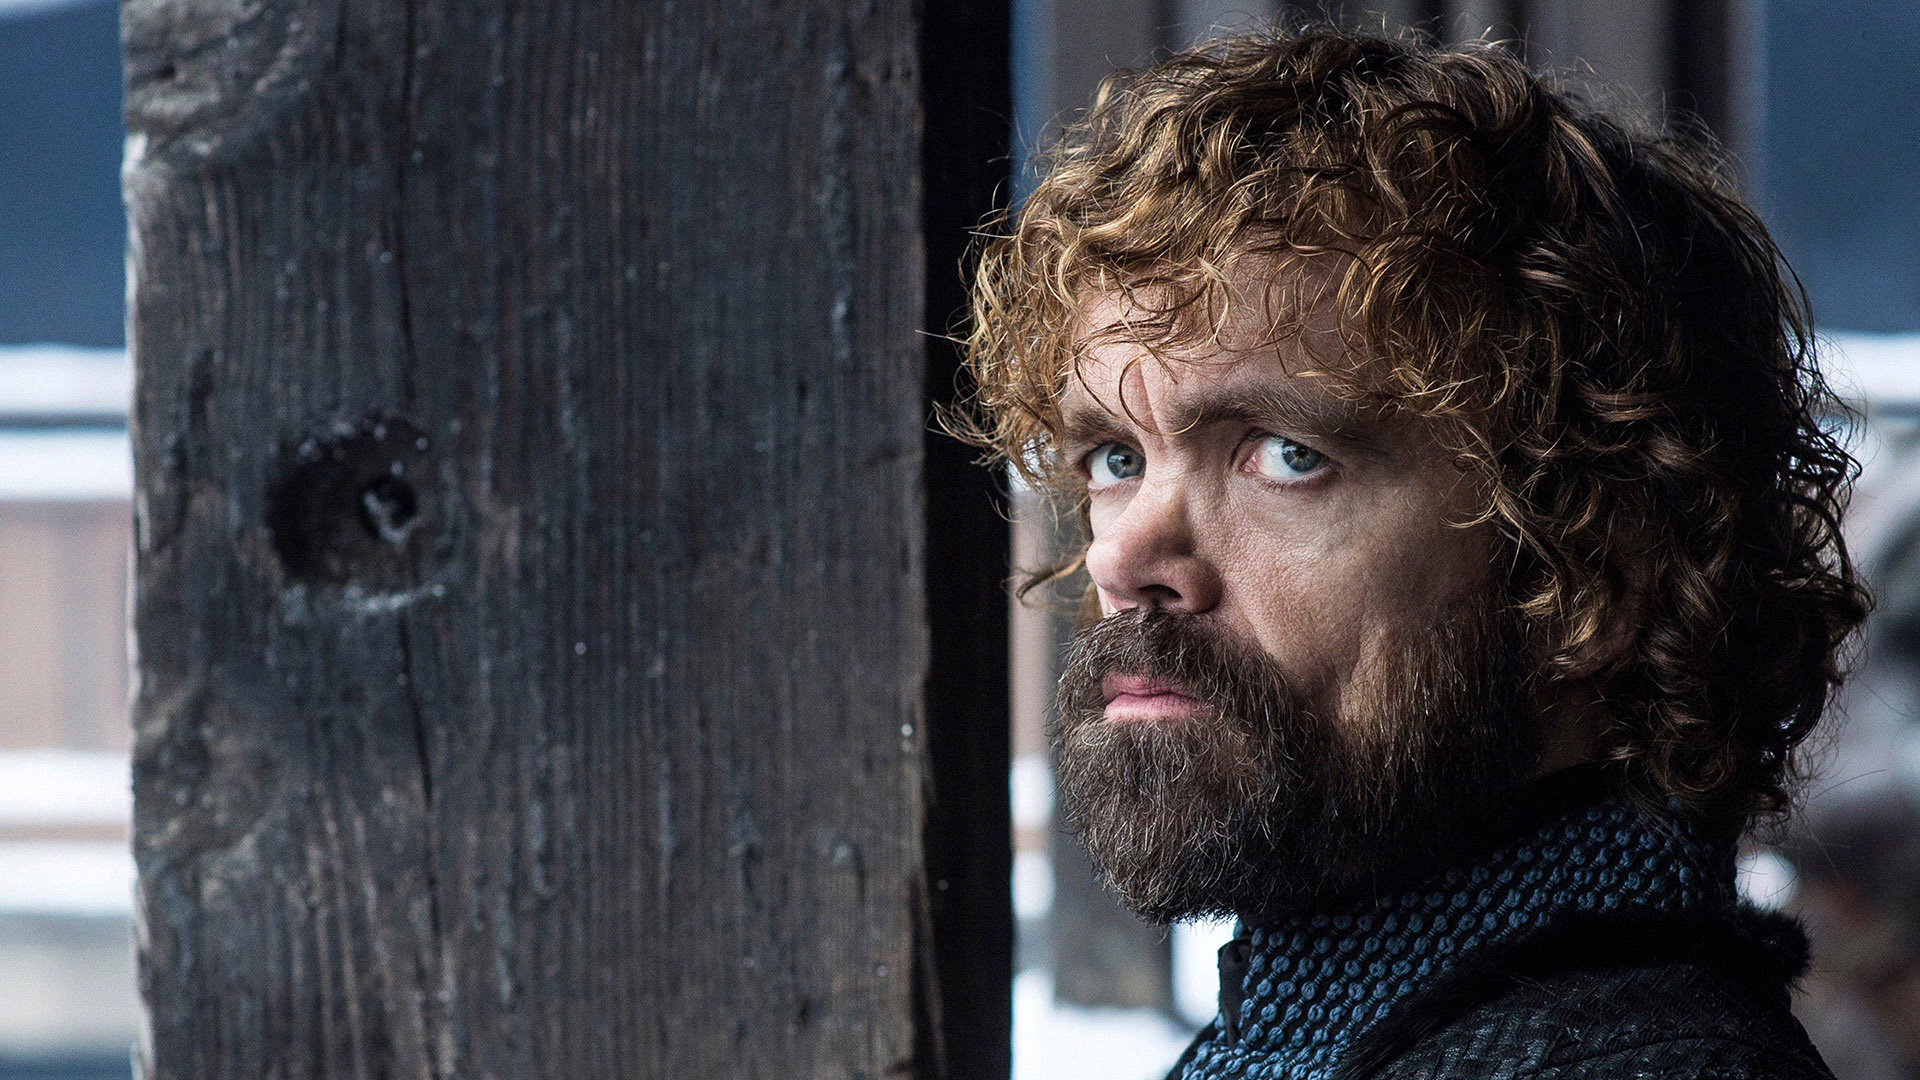 Peter Dinklage is Yet Another GoT Star Not Watching House of the Dragon